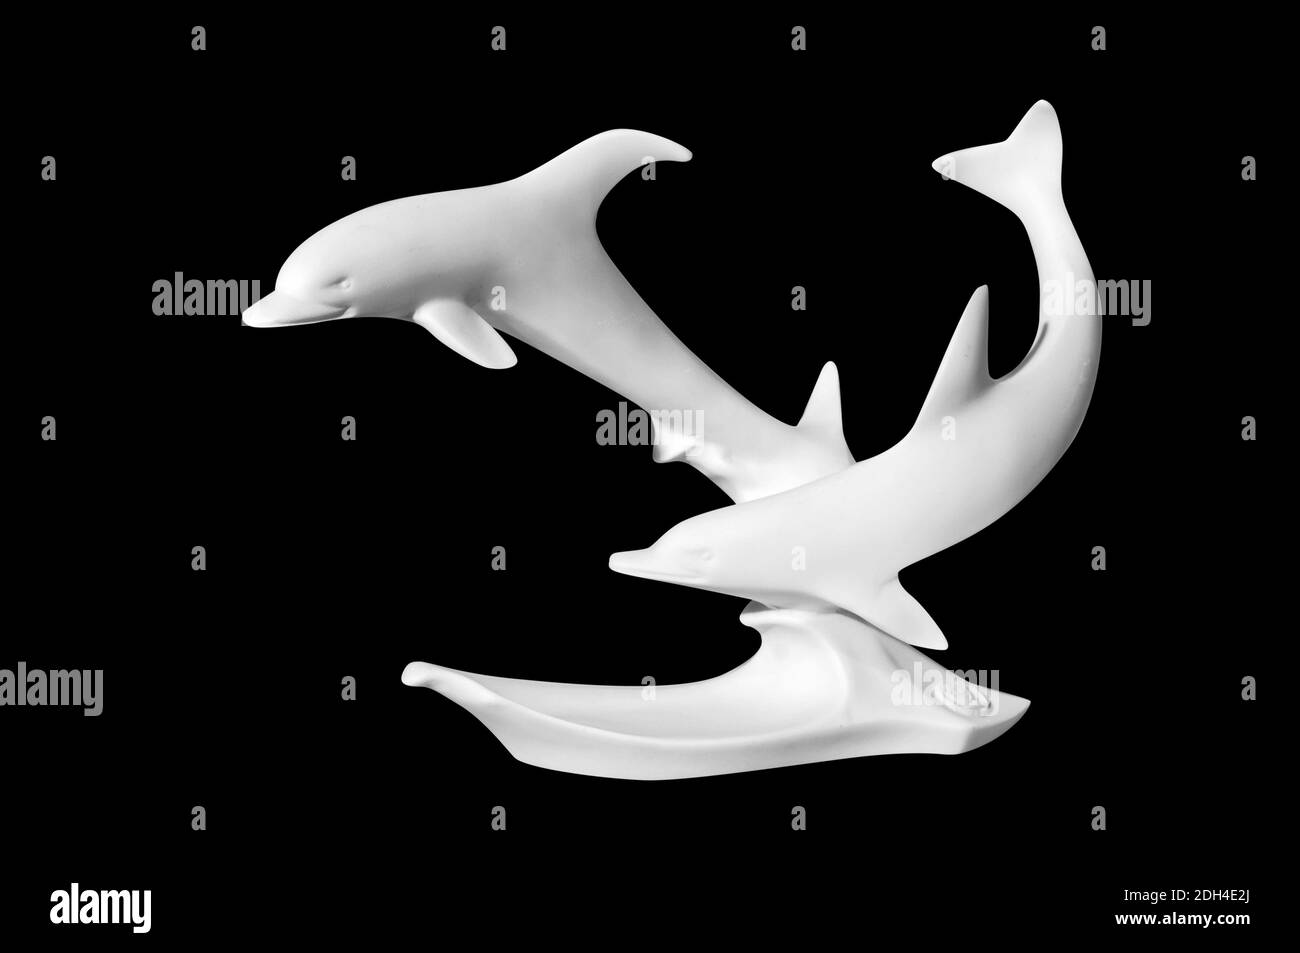 Statue of dolphins on a black background Stock Photo